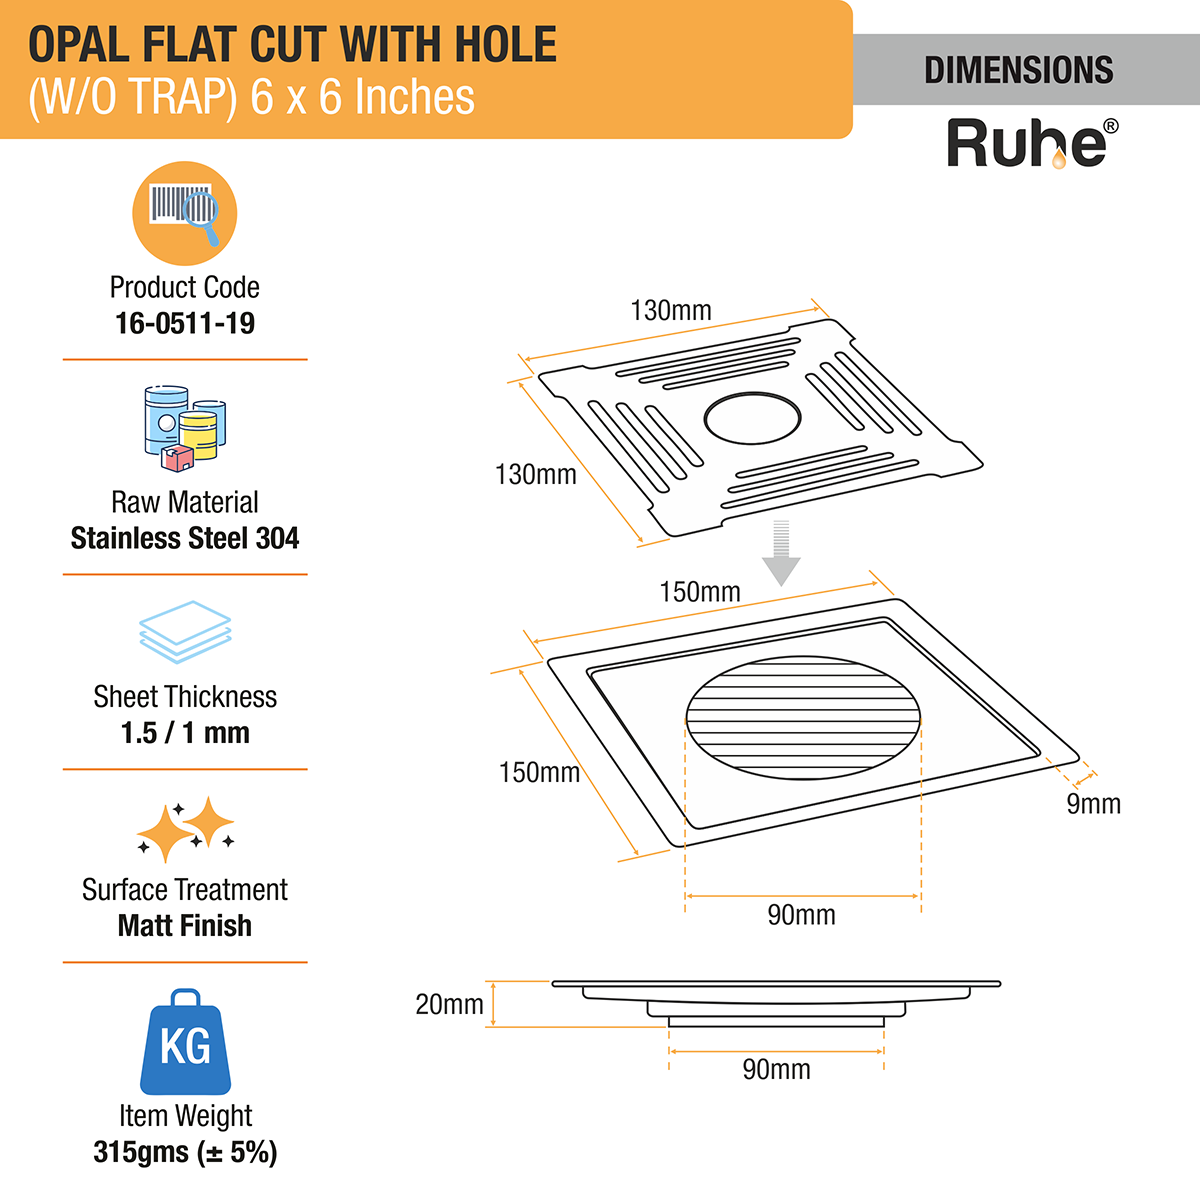 Opal Square Flat Cut 304-Grade Floor Drain with Hole (6 x 6 Inches) dimensions and sizes